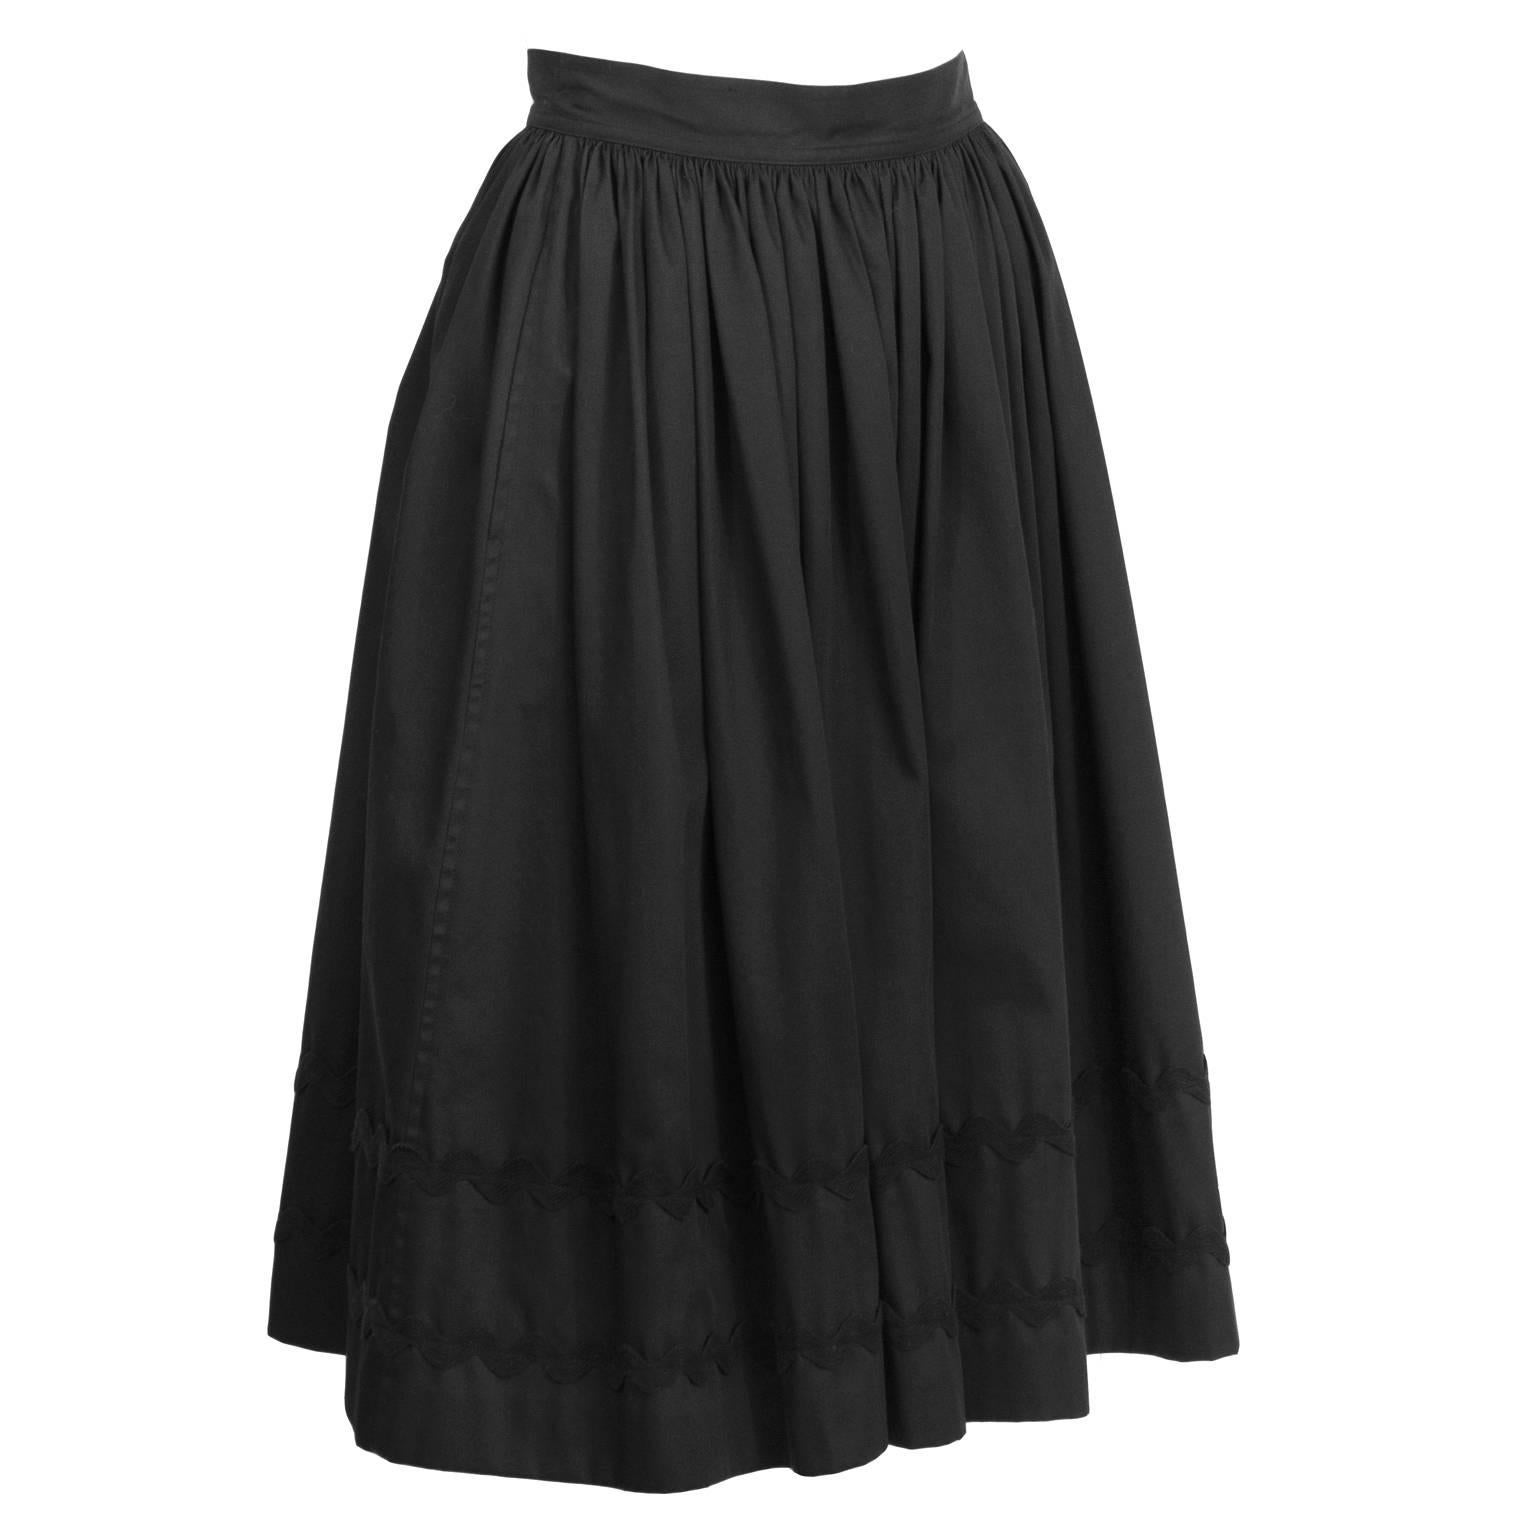 Very cute black cotton Yves Saint Laurent dirndl style skirt from the 1970's. Cinched at waist, with a full a line, softly gathered skirt. Two rows of black rickrack ribbon detail at bottom. Excellent vintage condition. Fits like US size 4.